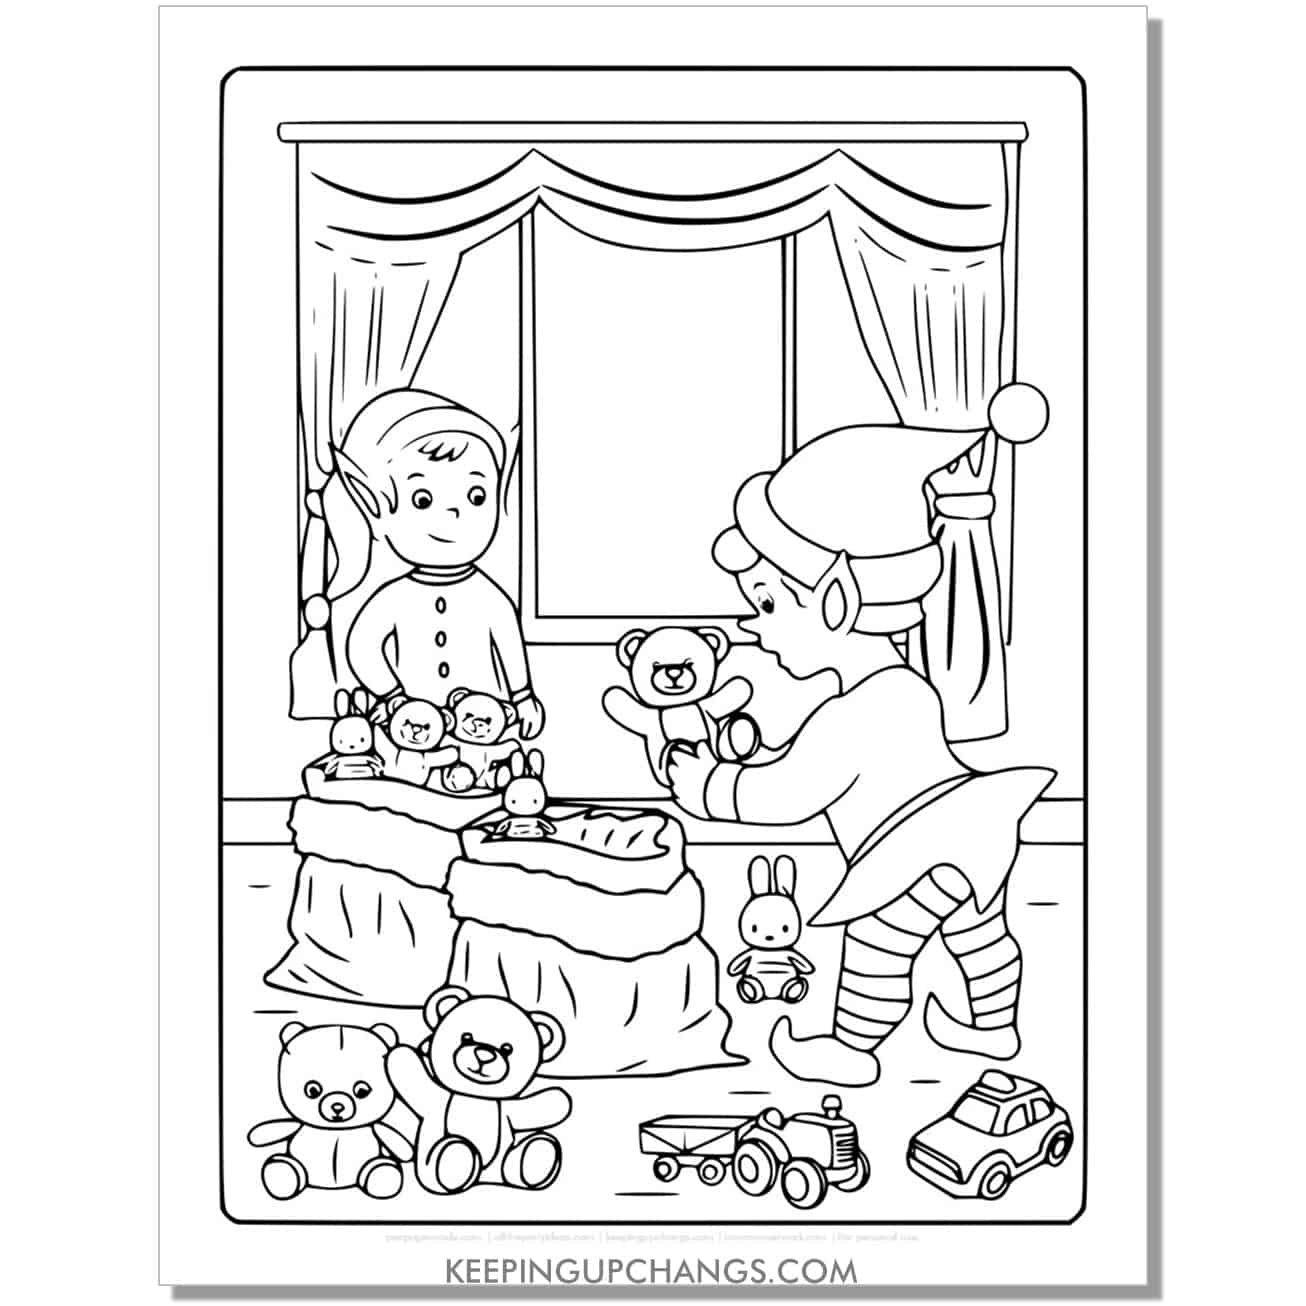 free elf with stuffed teddy bear dolls, toy cars full size coloring page.